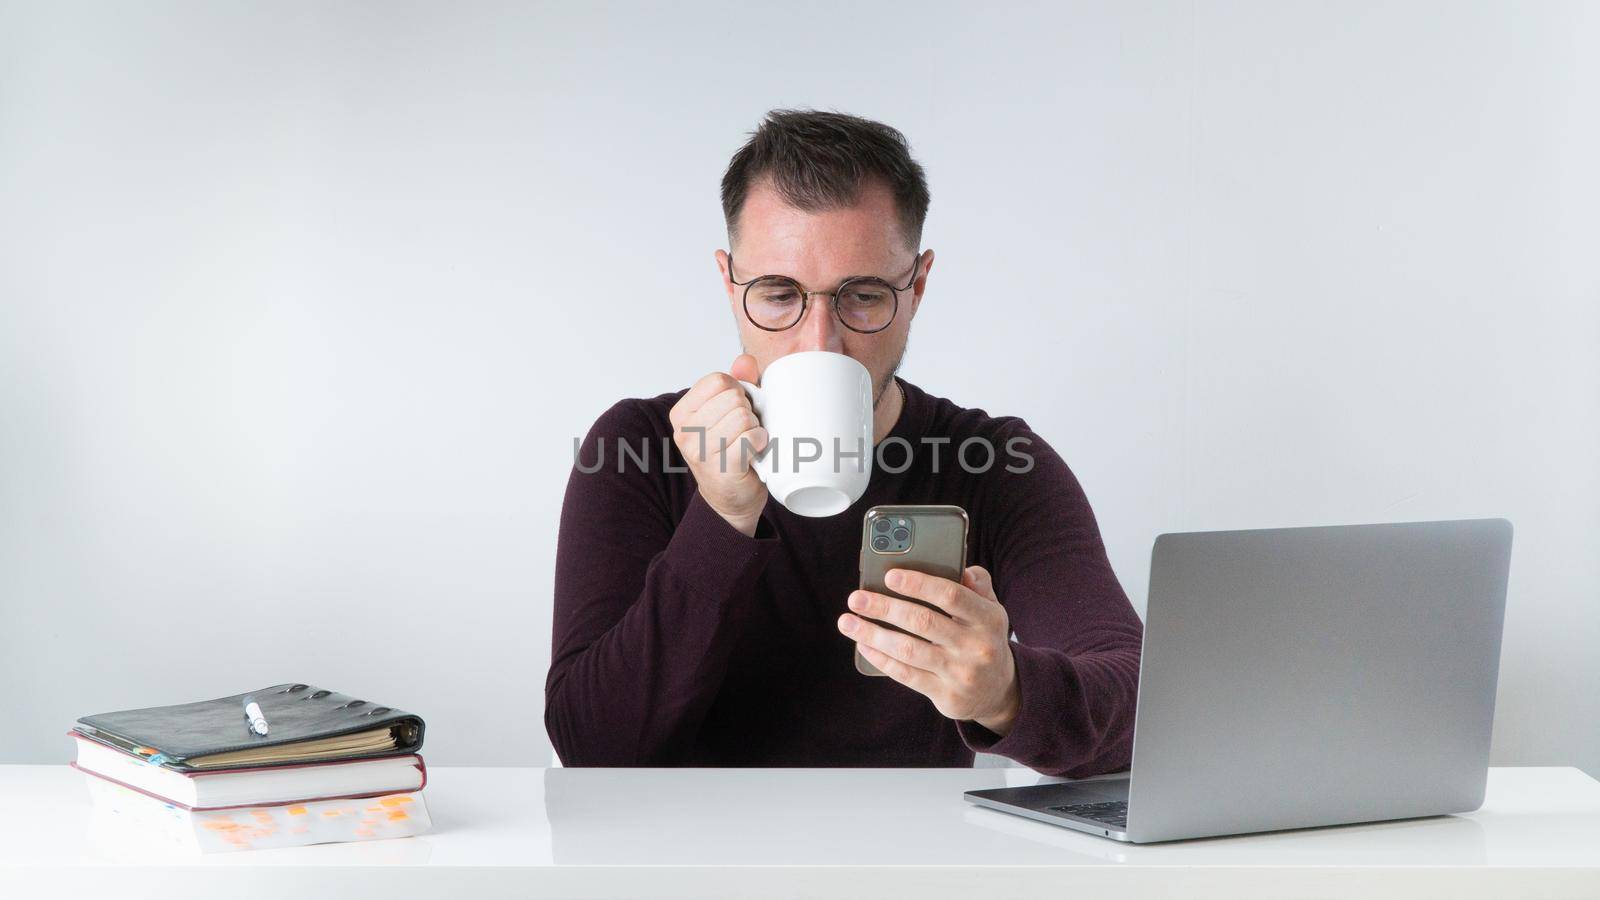 A man at work drinks coffee and looks at a smartphone by voktybre